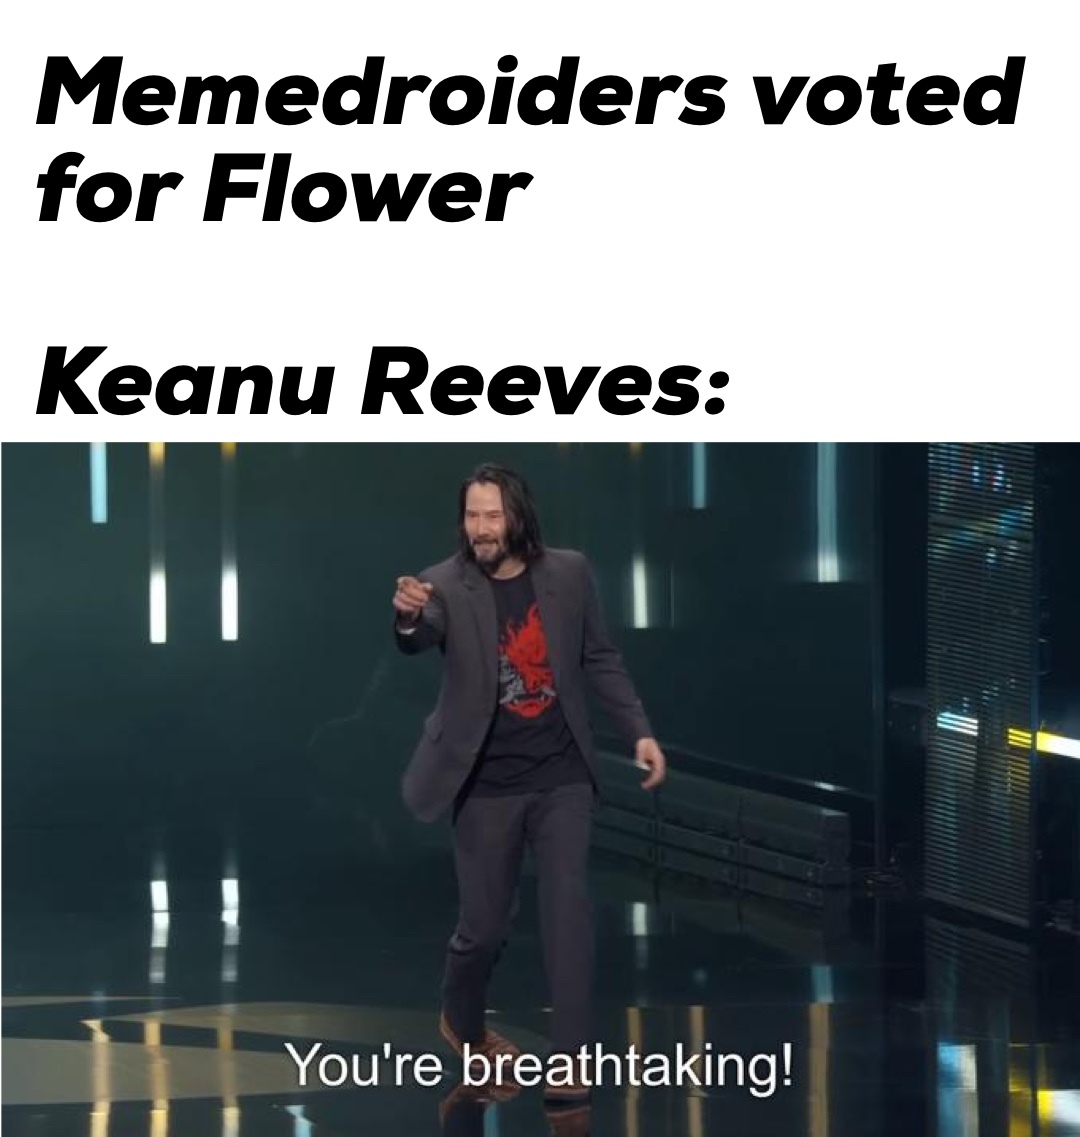 “we need more people like Keanu Reeves. yes, whoever voted for Flower, is breathtaking! - meme